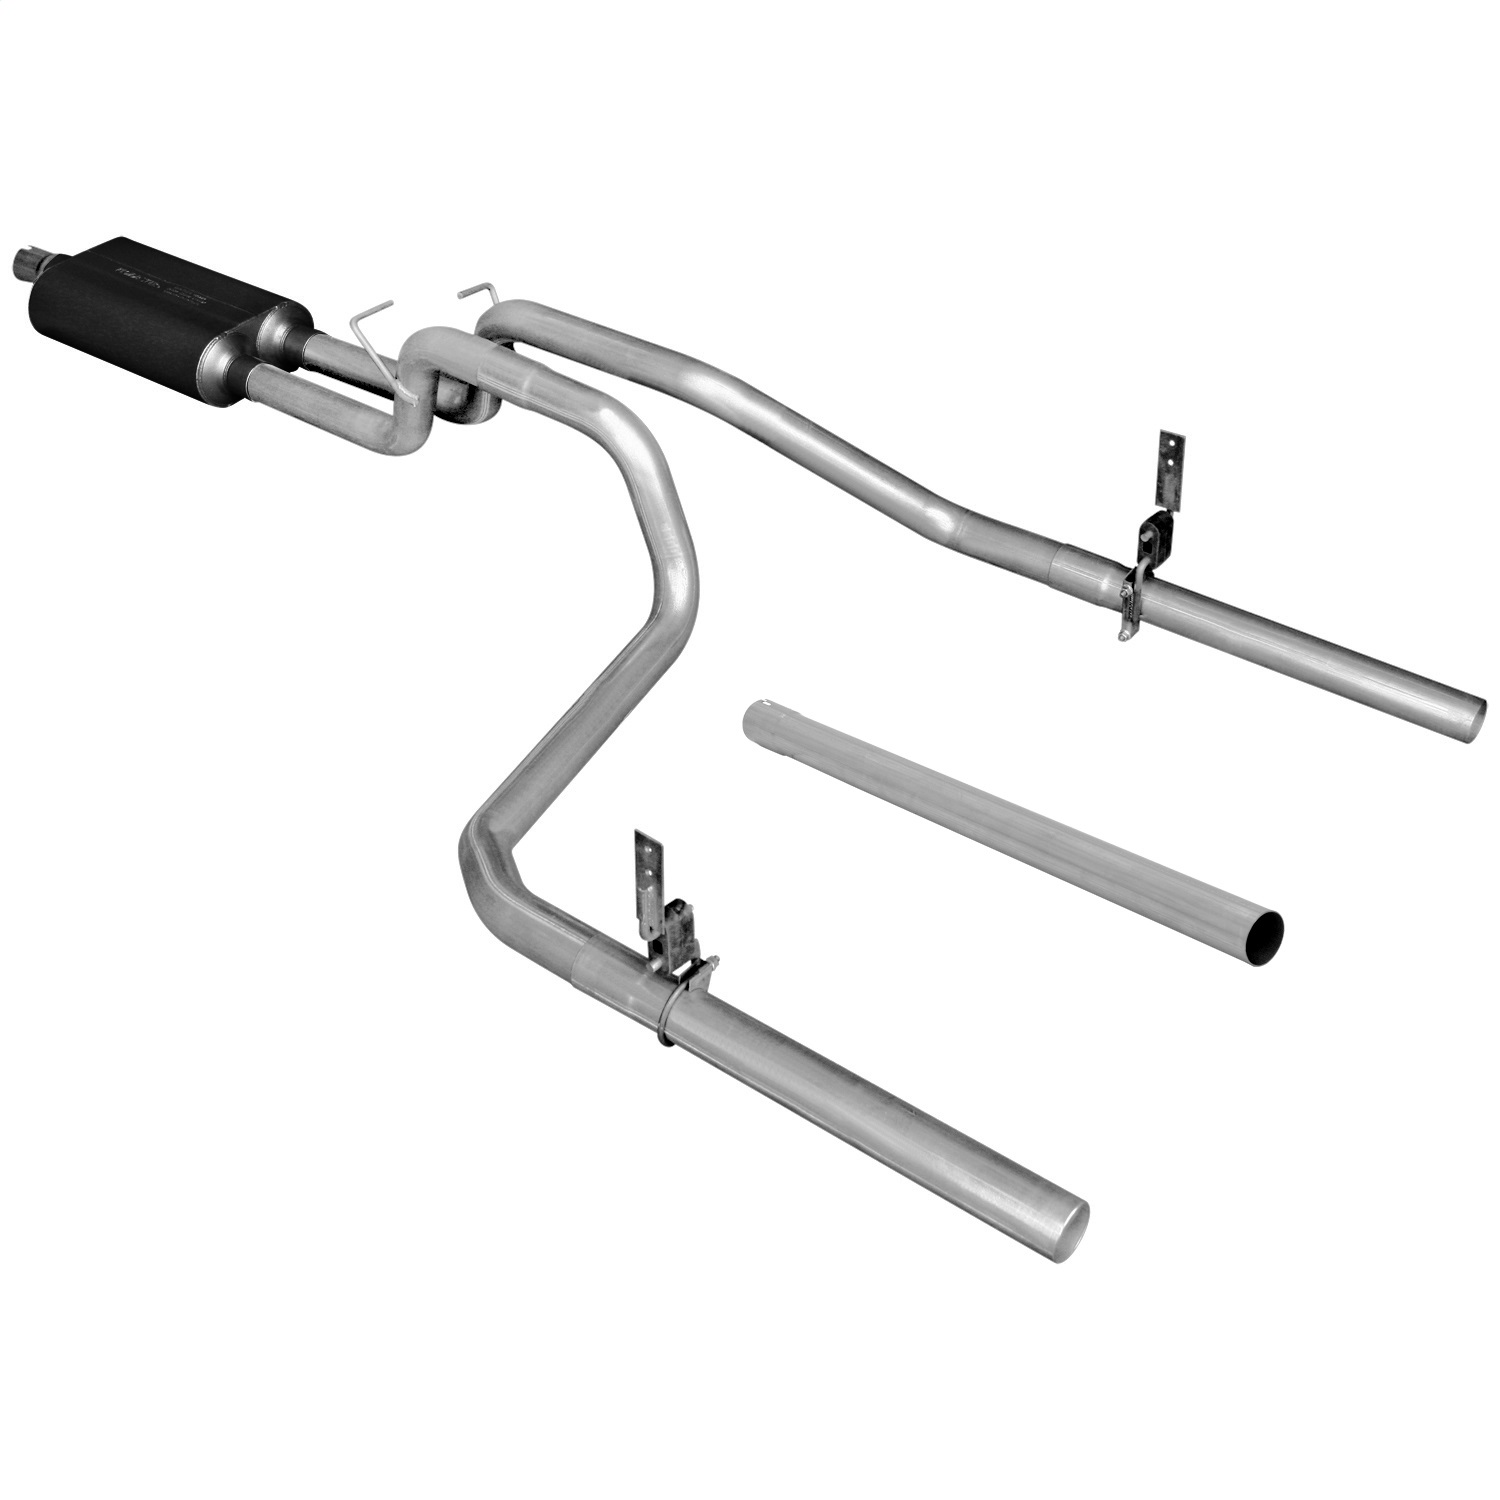 Flowmaster Flowmaster 17171 American Thunder Cat Back Exhaust System Fits 94-01 Ram 1500